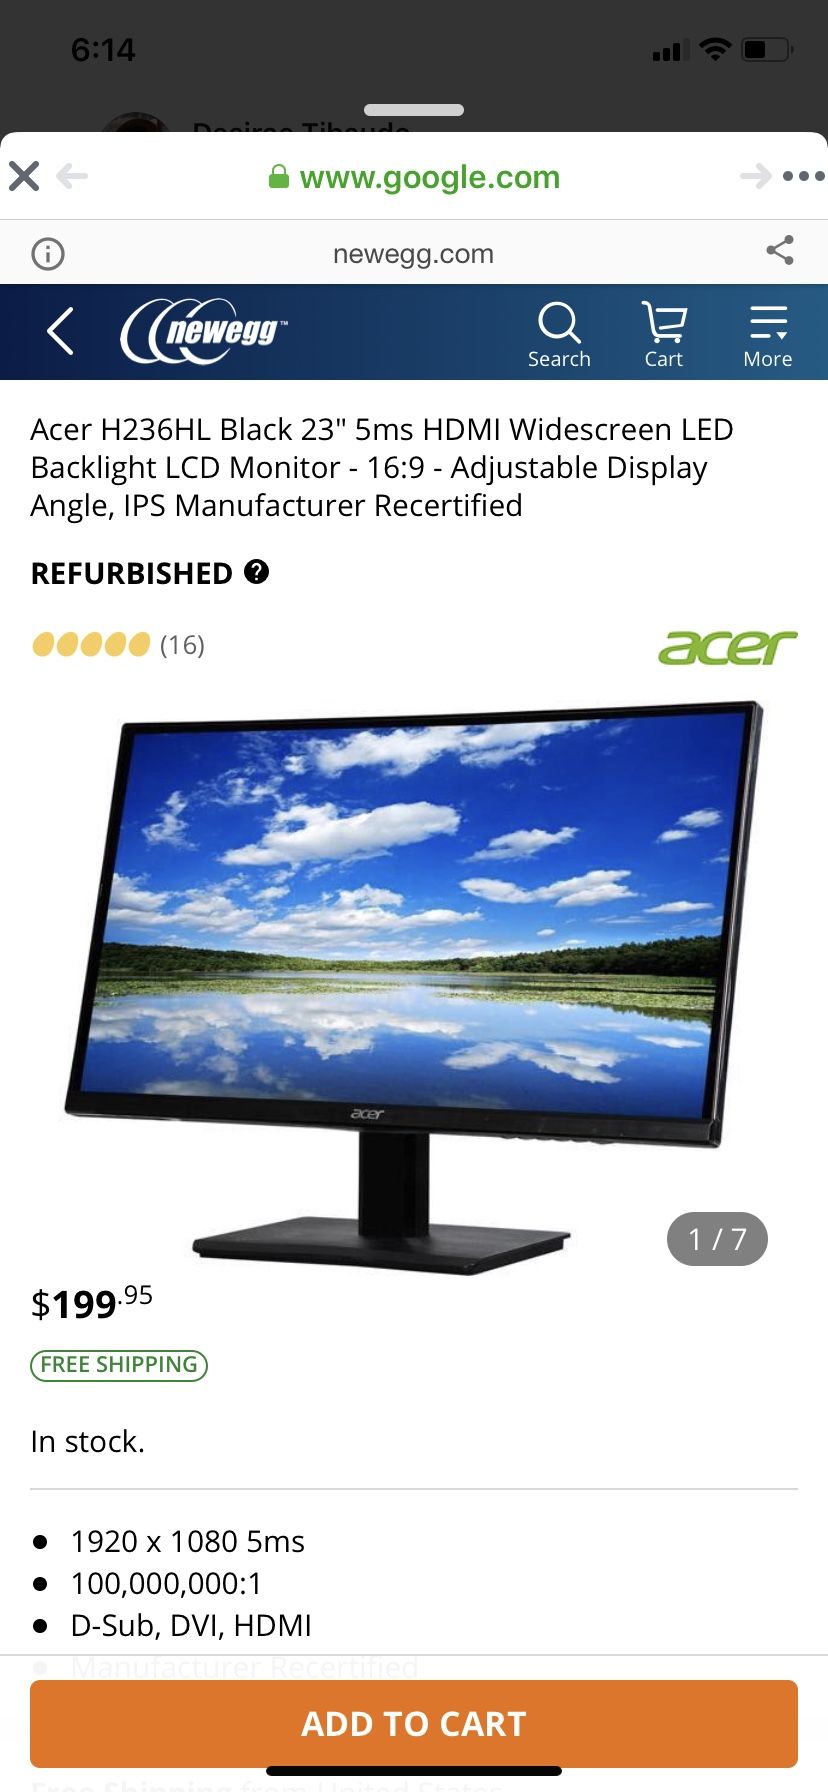 Two HD acer 23” monitors